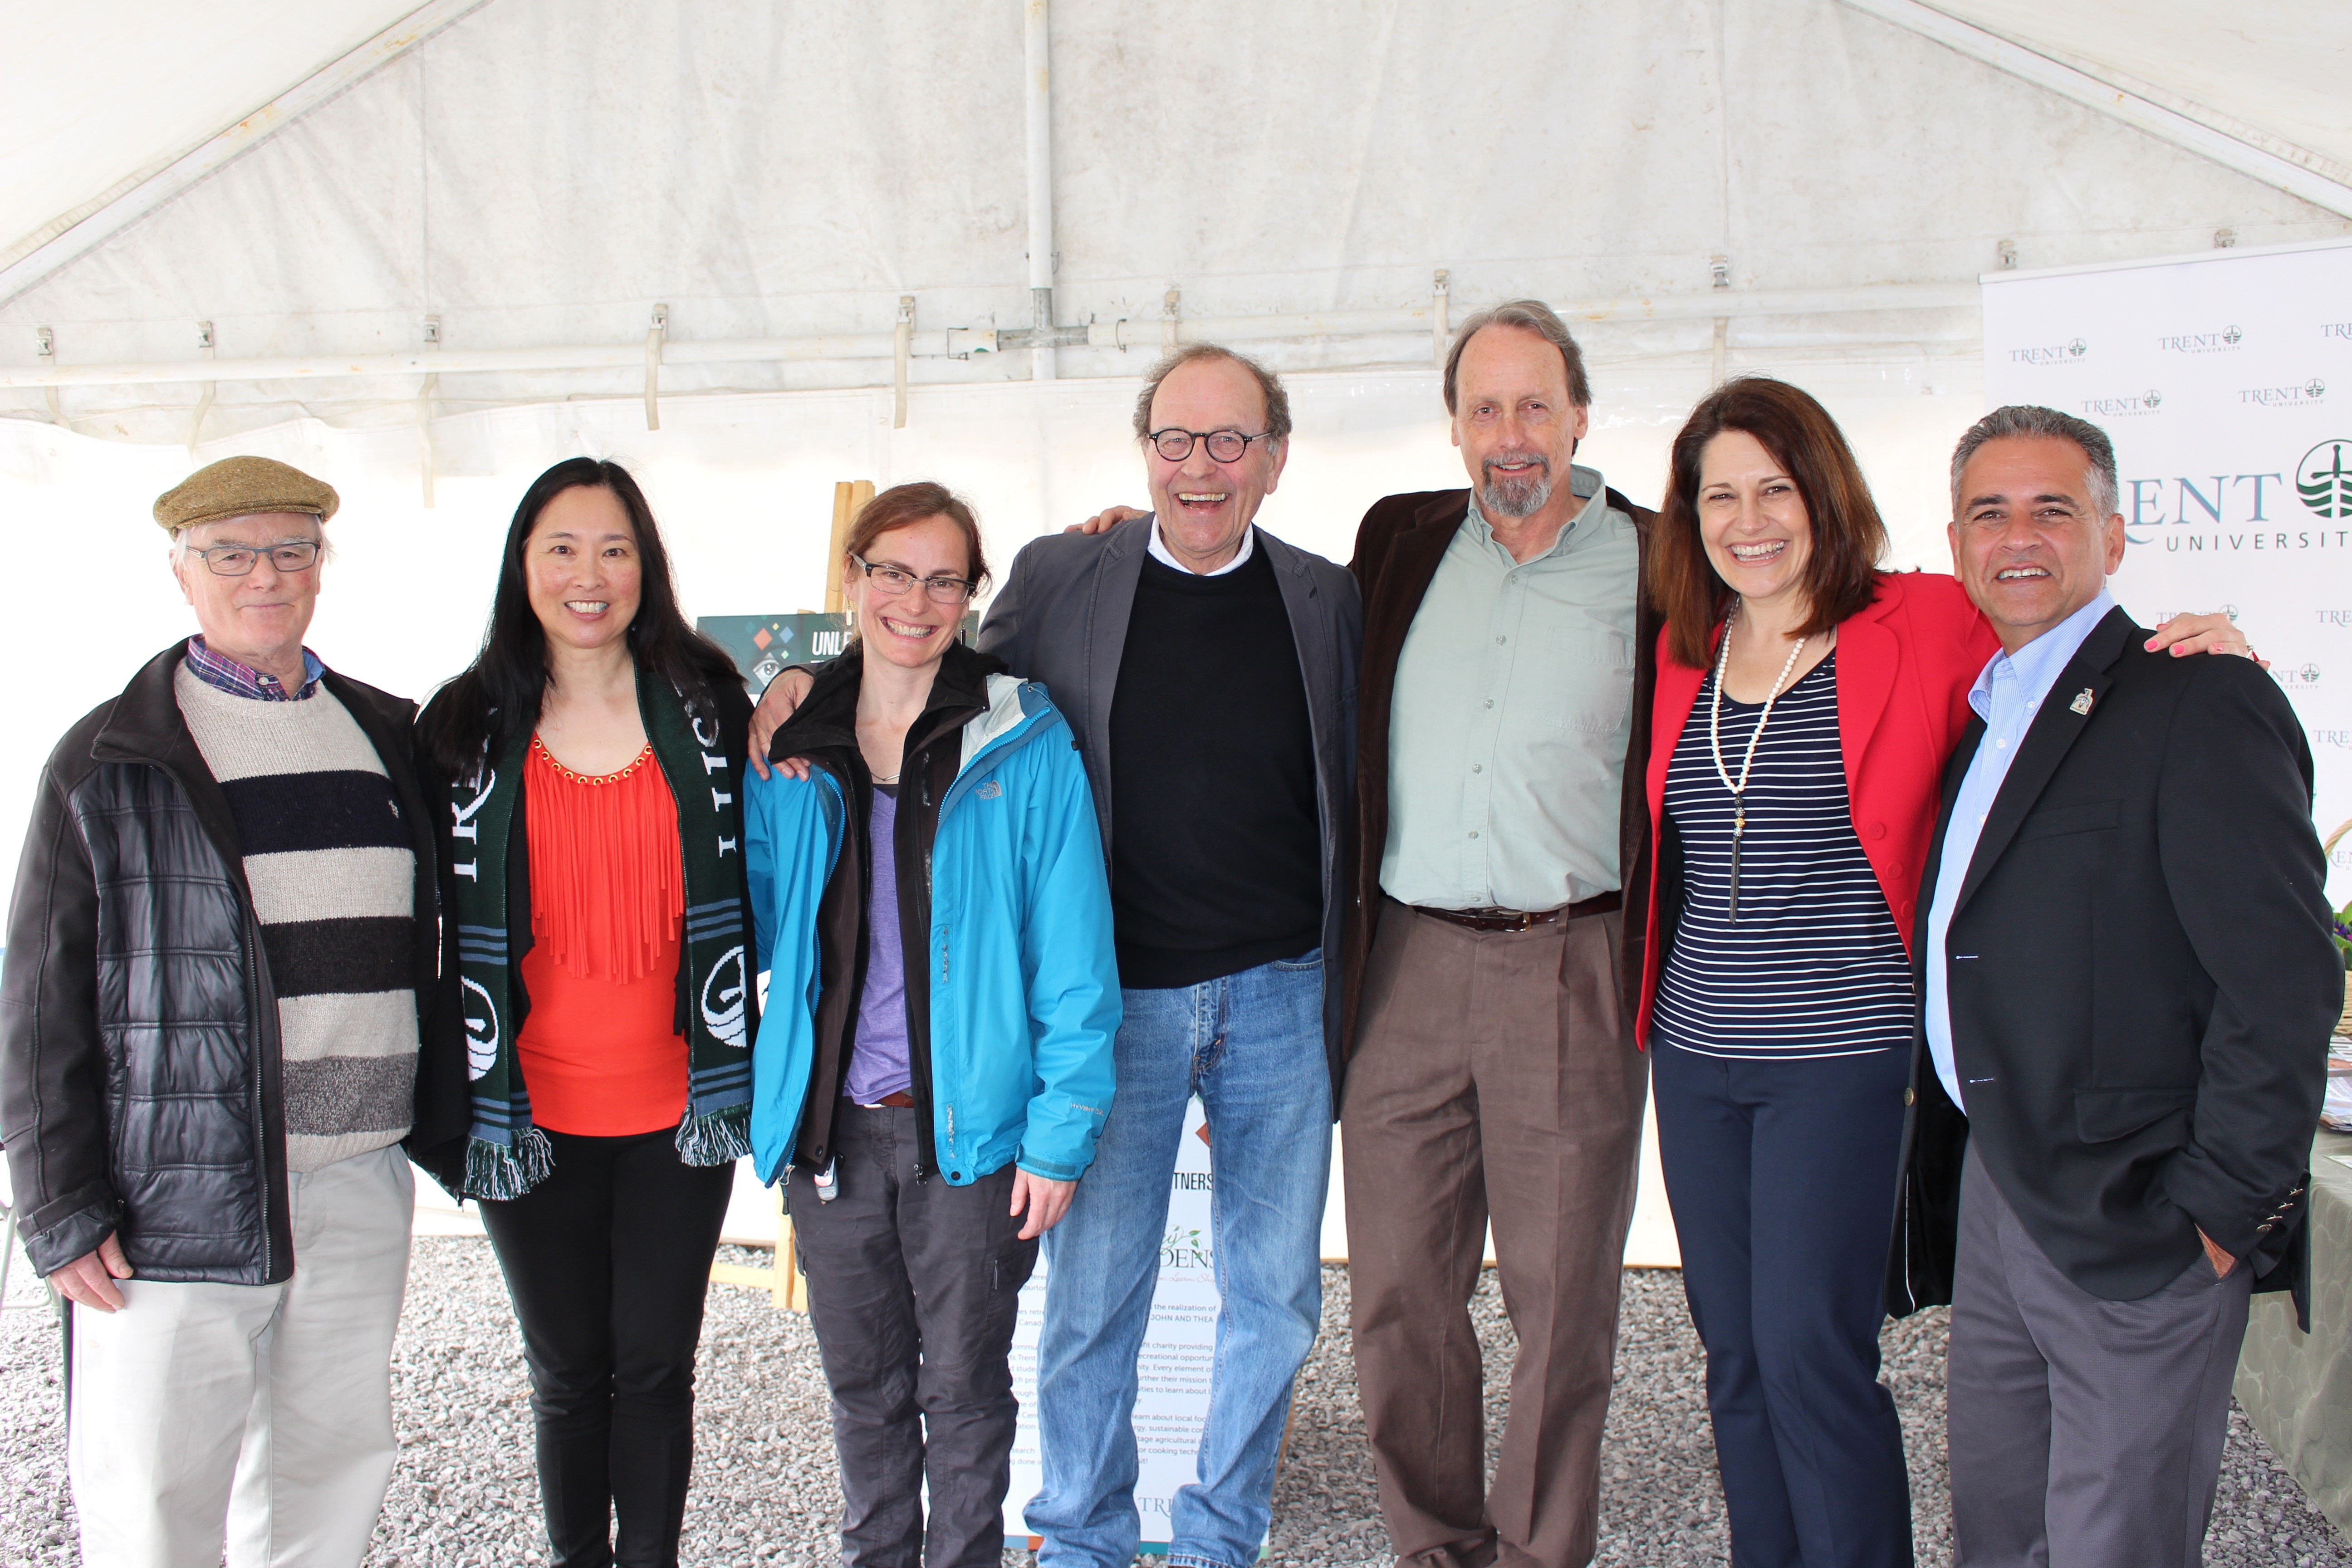 Left to right: Profs Tom Hutchinson (on Melissa Johnston’s thesis committee), Nadine Changfoot (CES Ptbo-Halib Academic Lead), CFICE RA 2015 Melissa Johnston, CCE visionaries Profs John Wadland and Tom Whillans, Julie Davis (VP Advancement), Prof. Asaf Zohar (Director, MA Sustainability Studies)